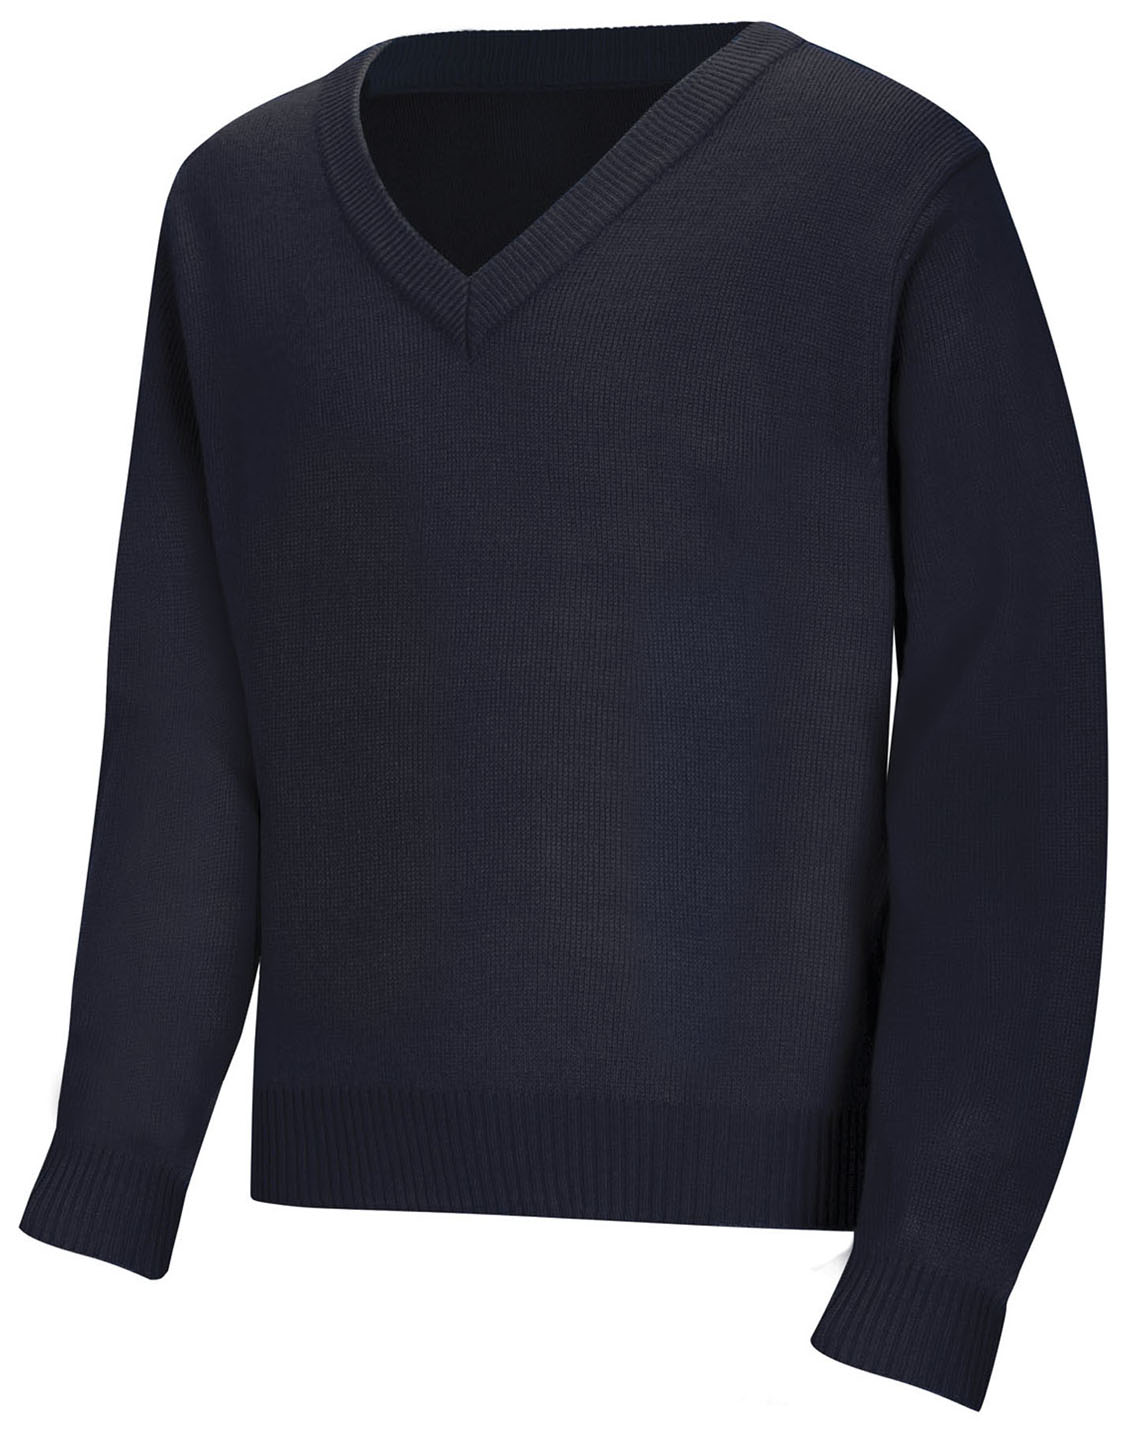 Chesterton - ADULT & YOUTH UNISEX LONG SLEEVE V-NECK SWEATER #5670 - Growing Kids